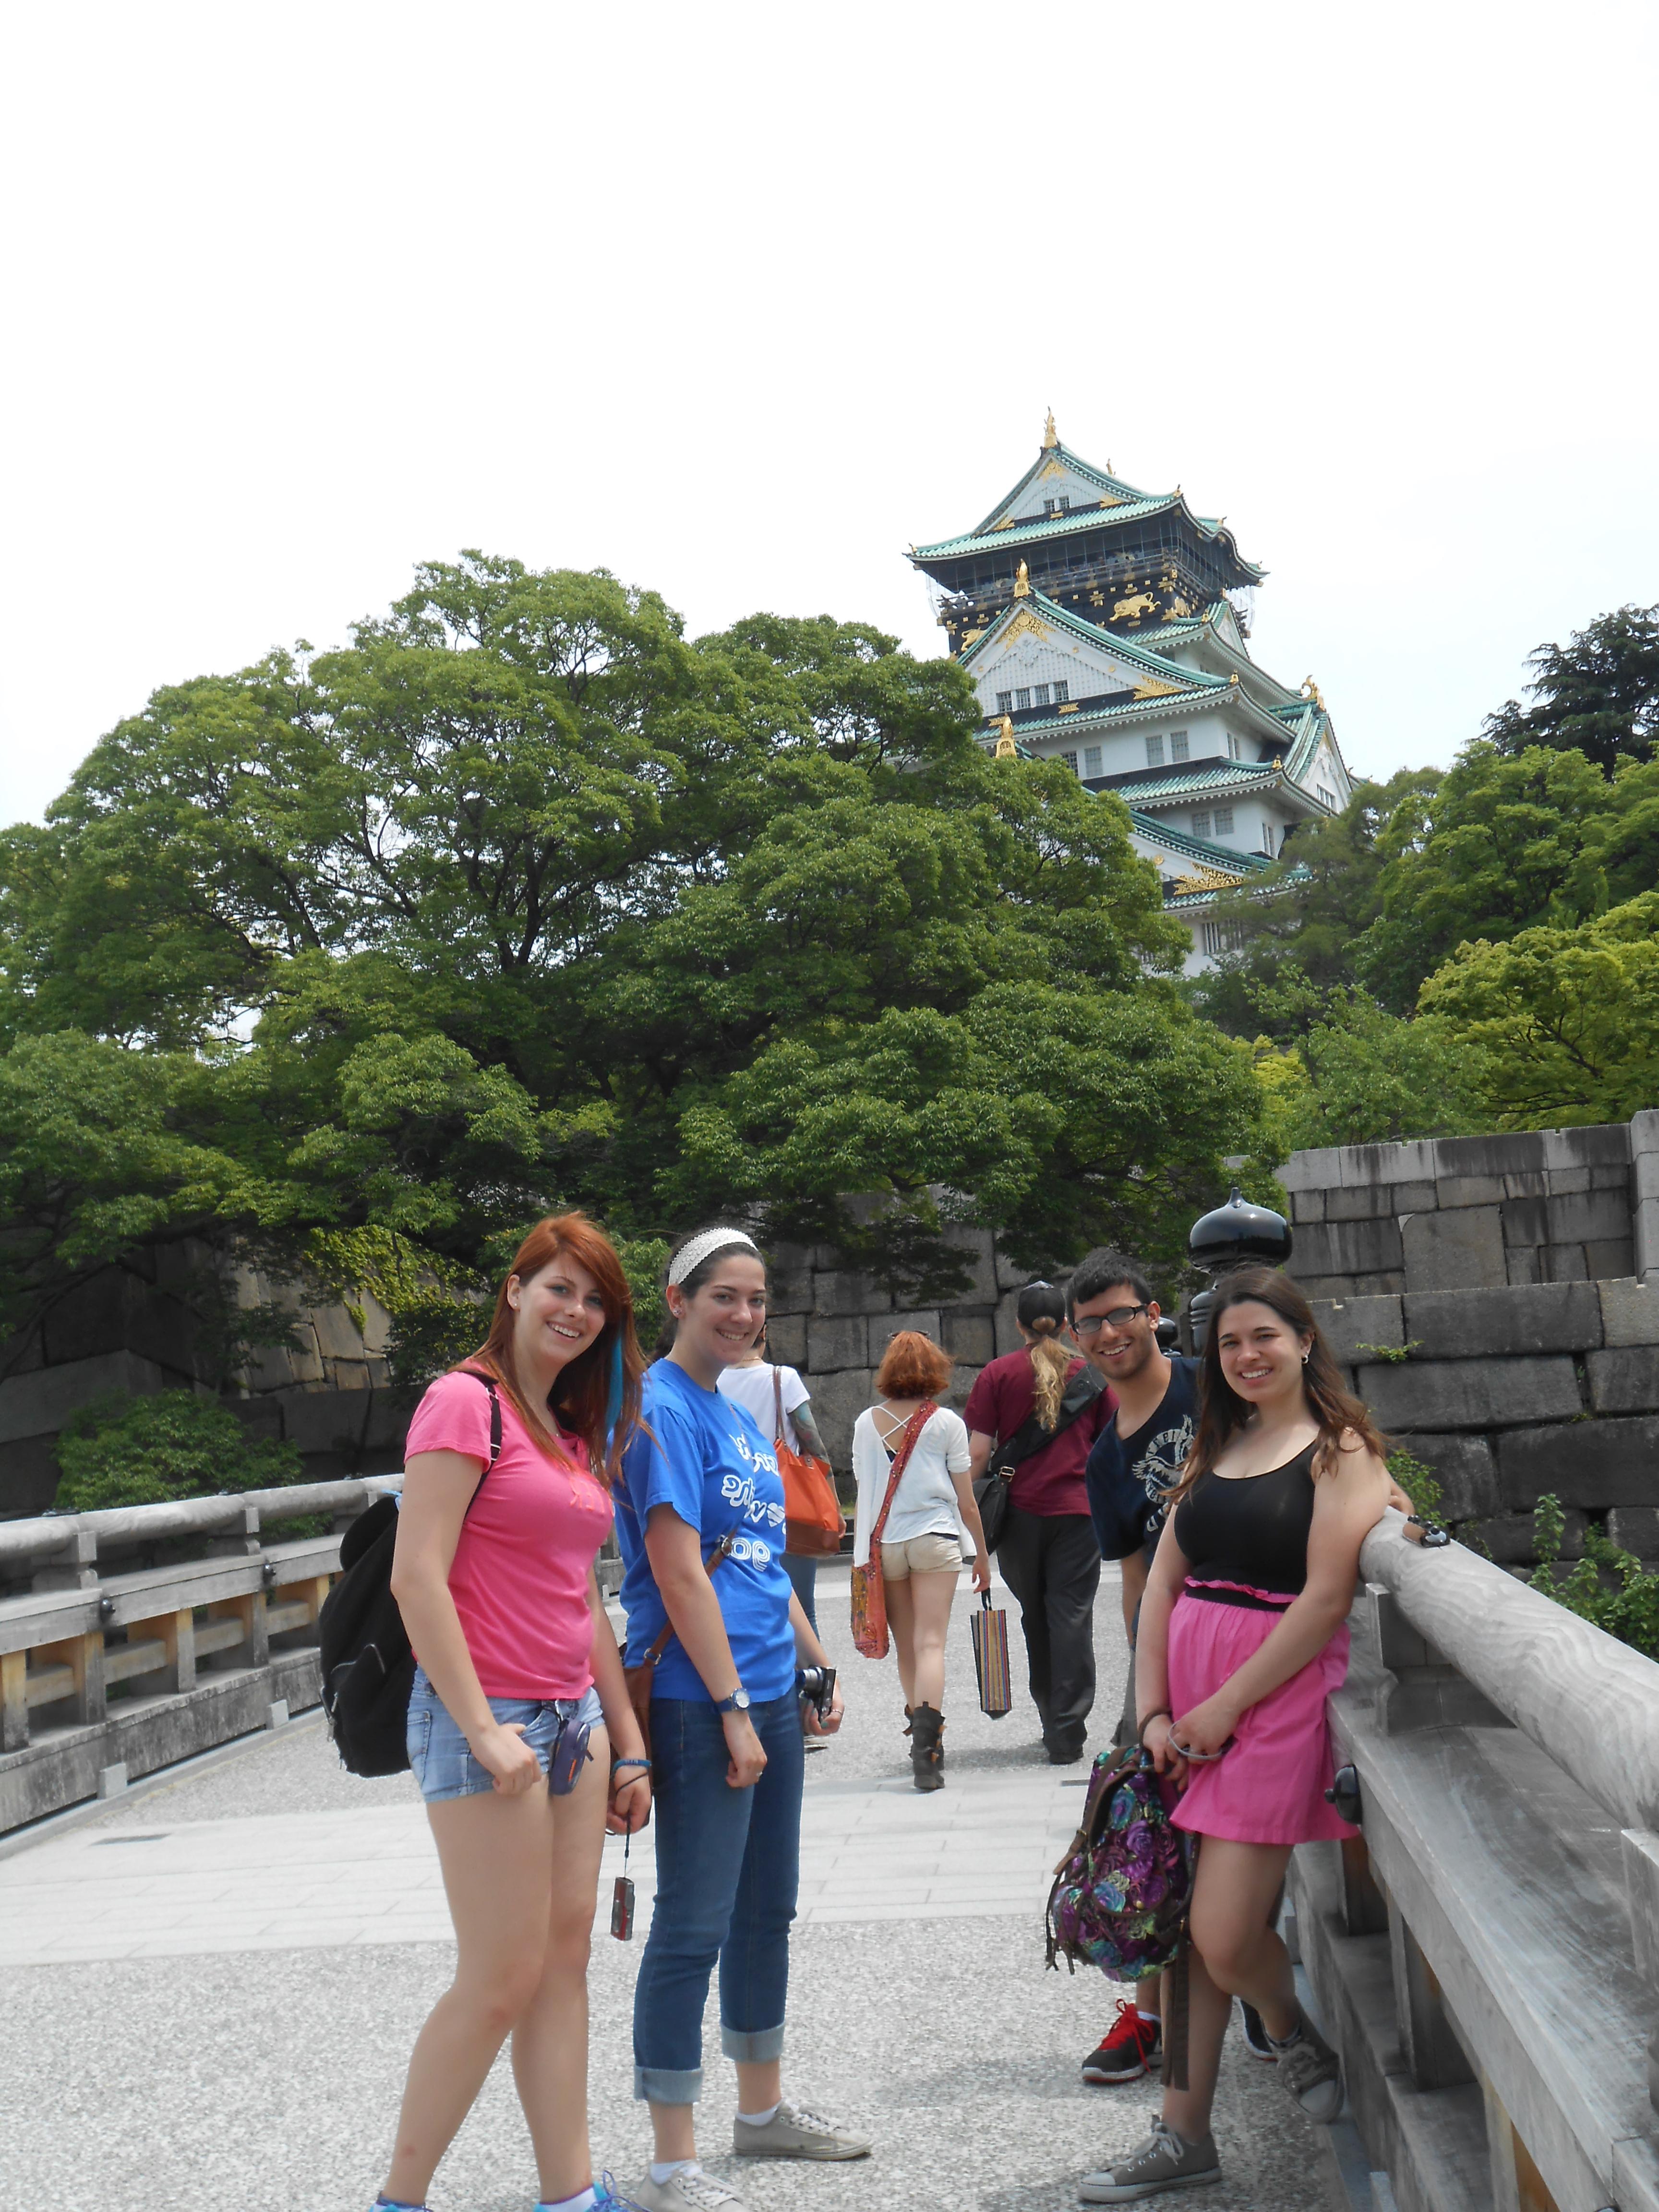 Students on bridge in front of Japanese castle